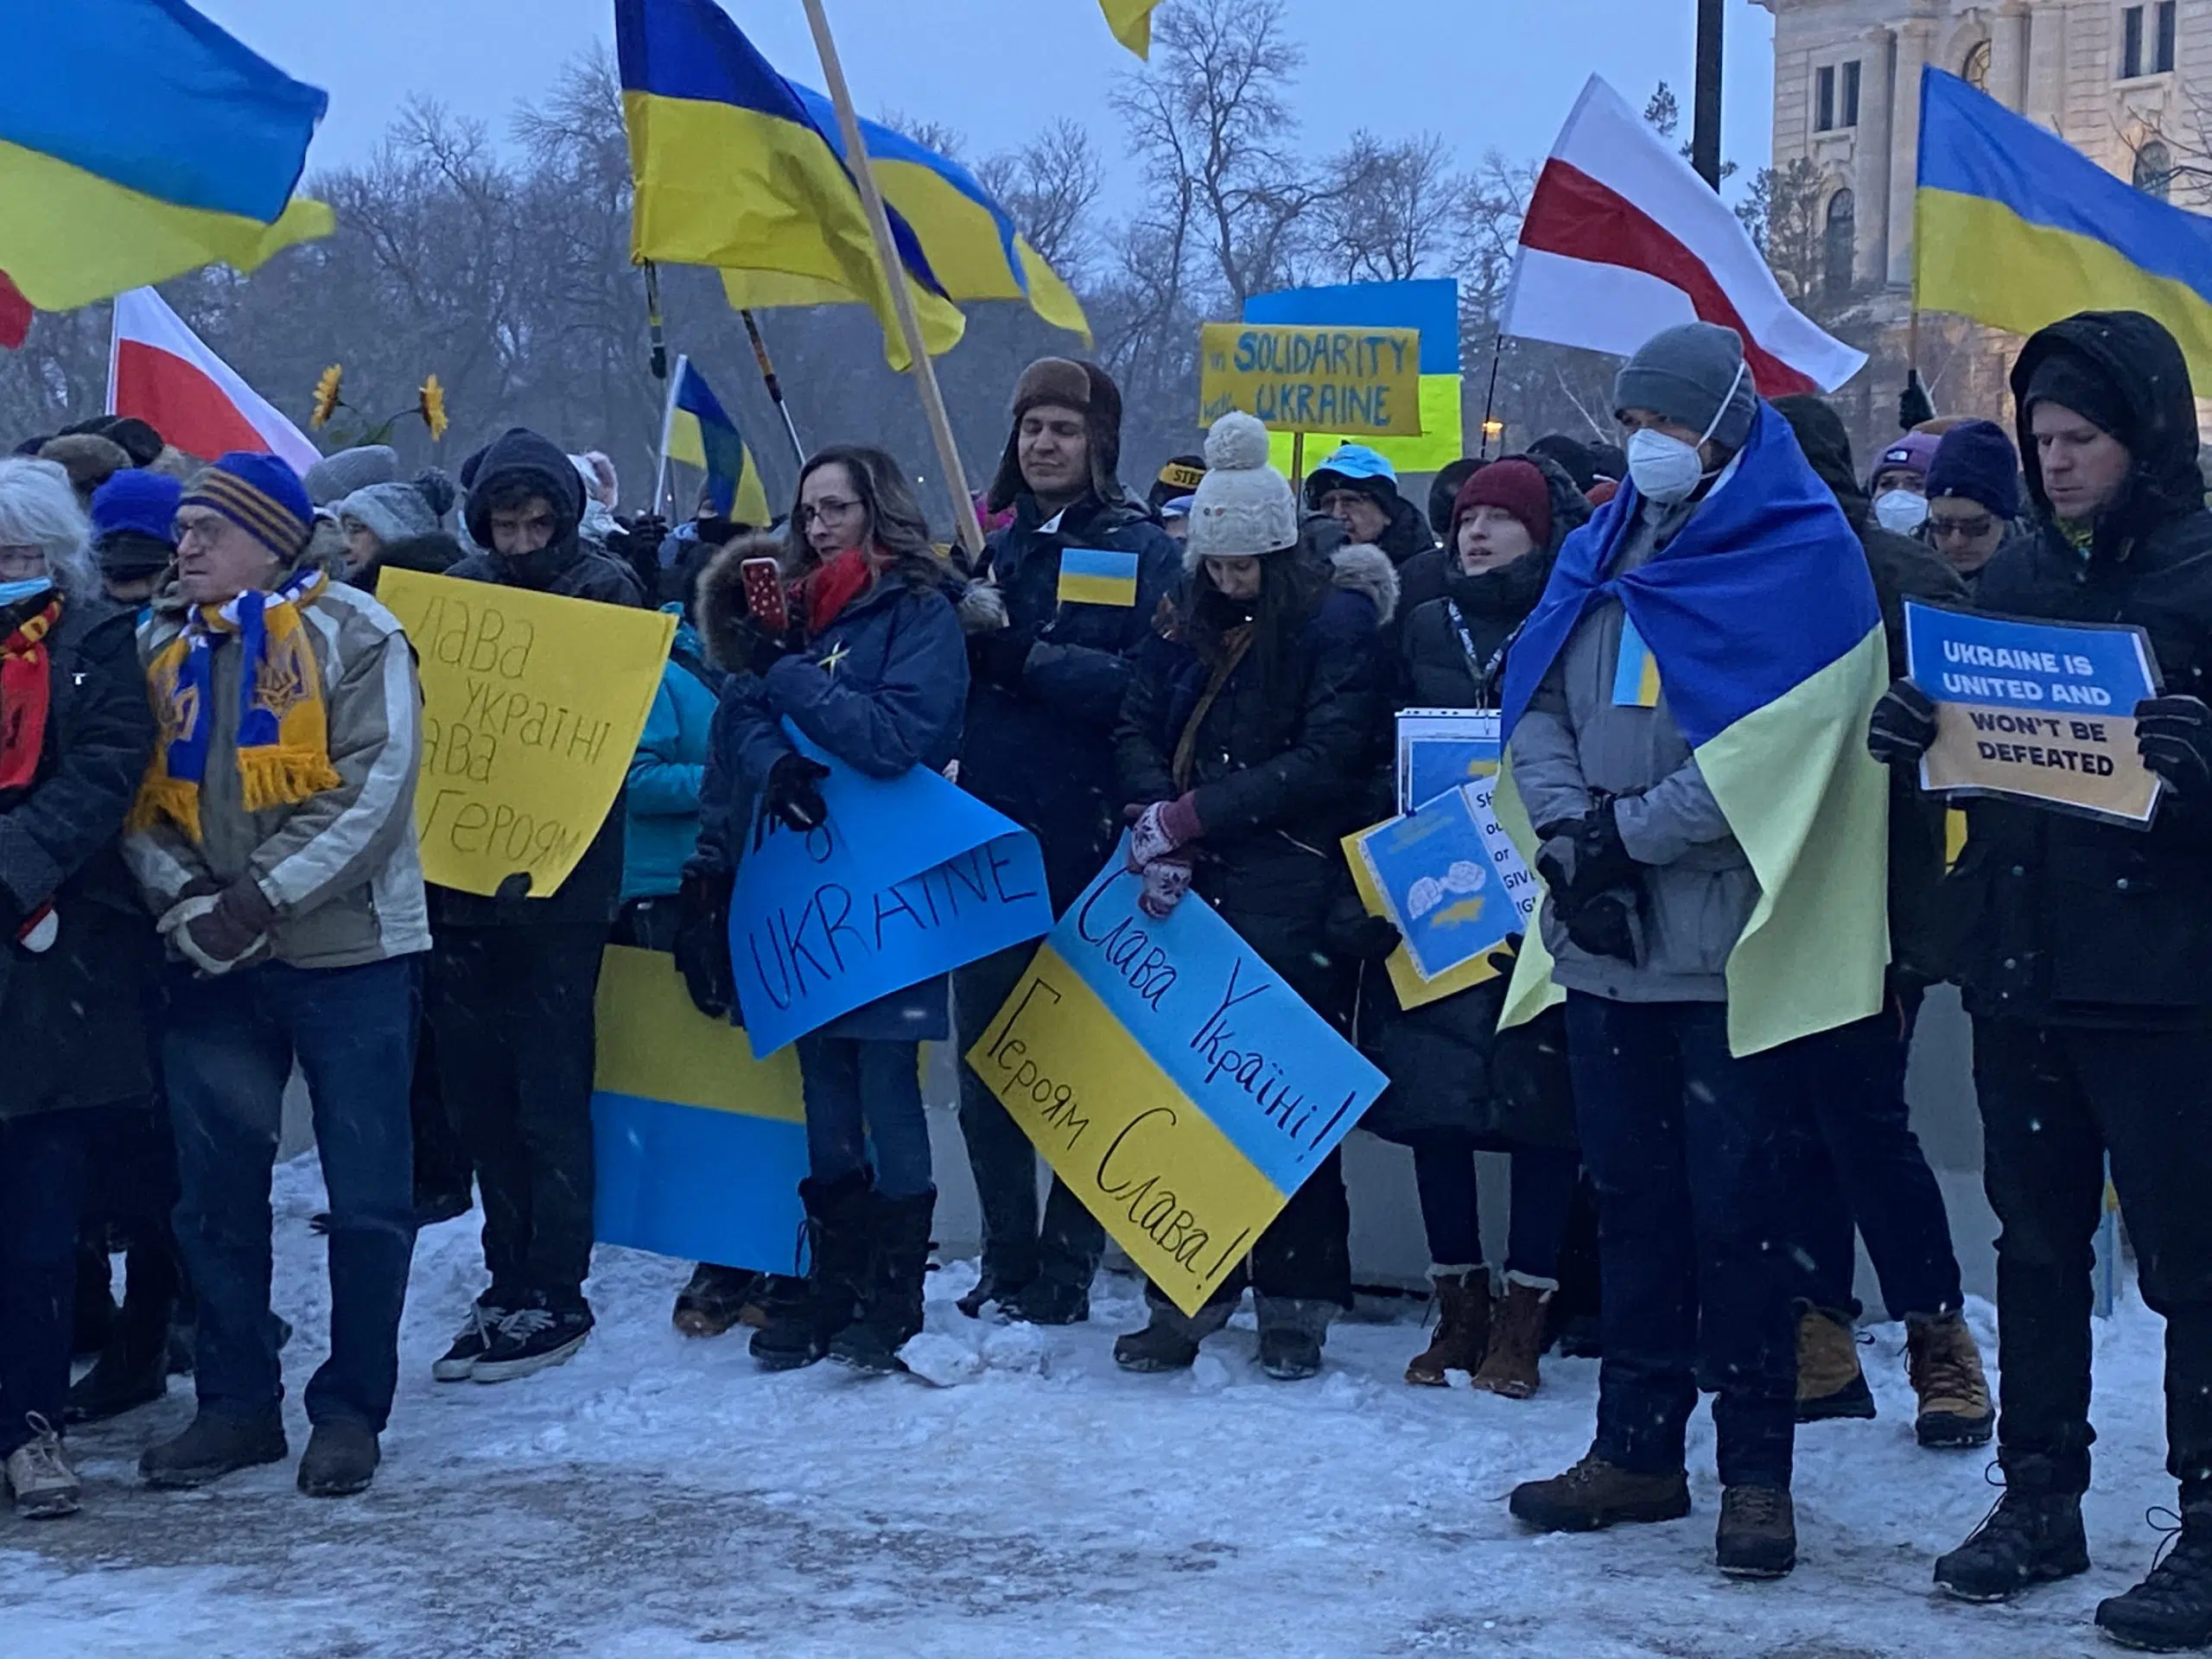 Speakers Express Sympathy With Ukraine Anger At Putin CKRM The